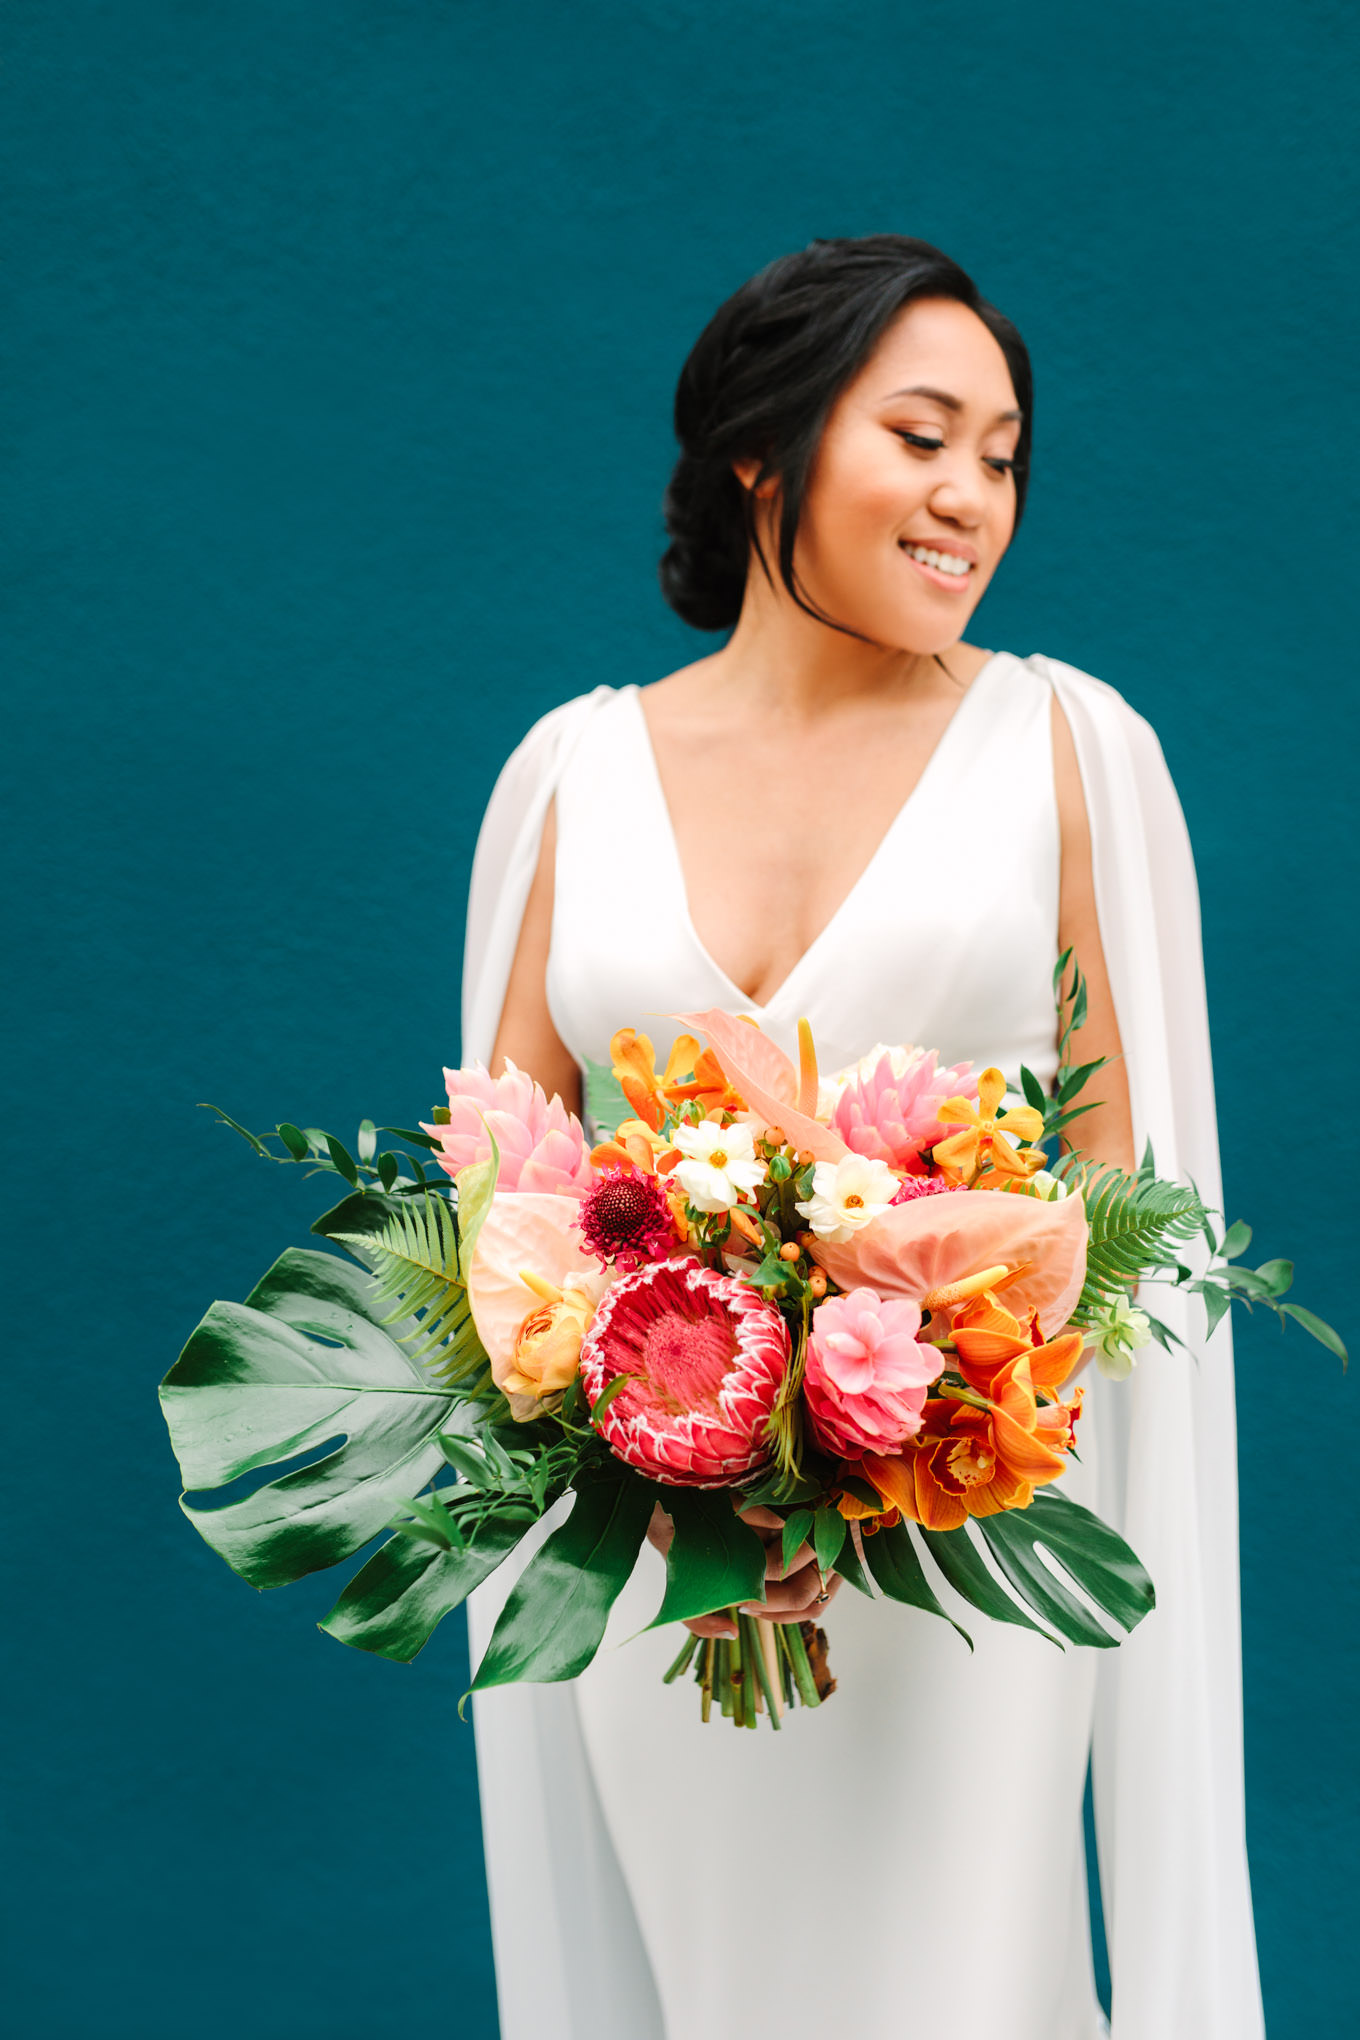 Bride with tropical bouquet in front of teal wall | TV inspired wedding at The Fig House Los Angeles | Published on The Knot | Fresh and colorful photography for fun-loving couples in Southern California | #losangeleswedding #TVwedding #colorfulwedding #theknot   Source: Mary Costa Photography | Los Angeles wedding photographer